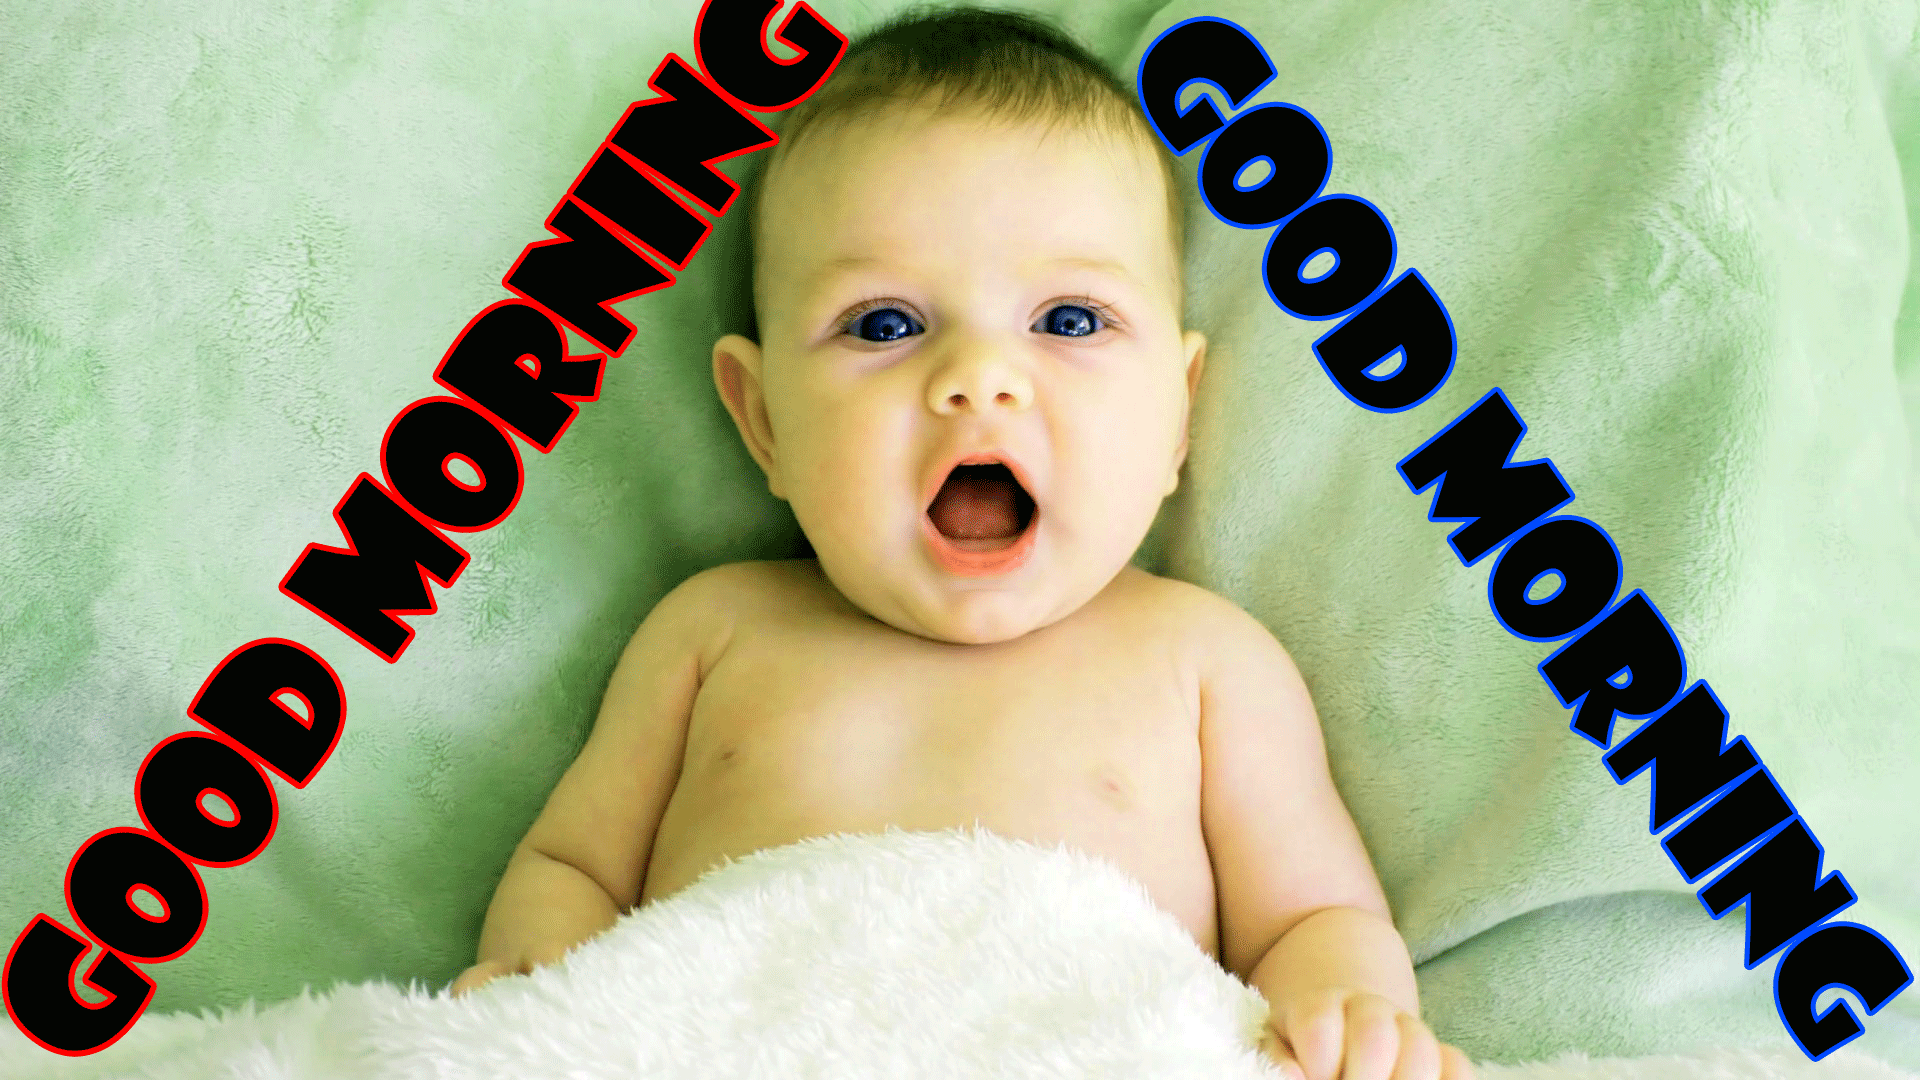 Cute Baby Good Morning Wallpaper Pictures Images Download , HD Wallpaper & Backgrounds